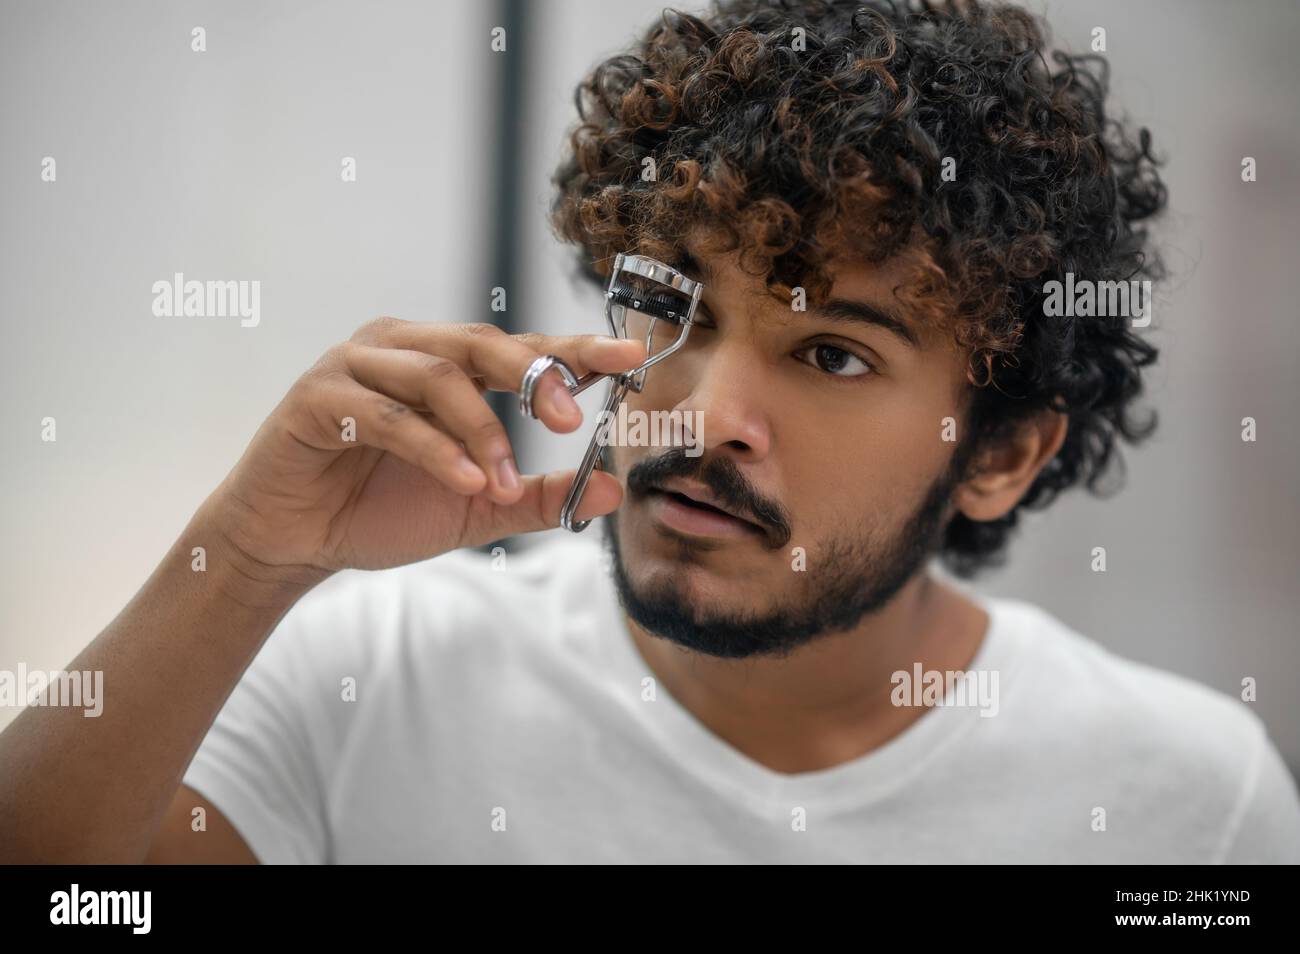 Serious concentrated young man using a lash-curler Stock Photo - Alamy